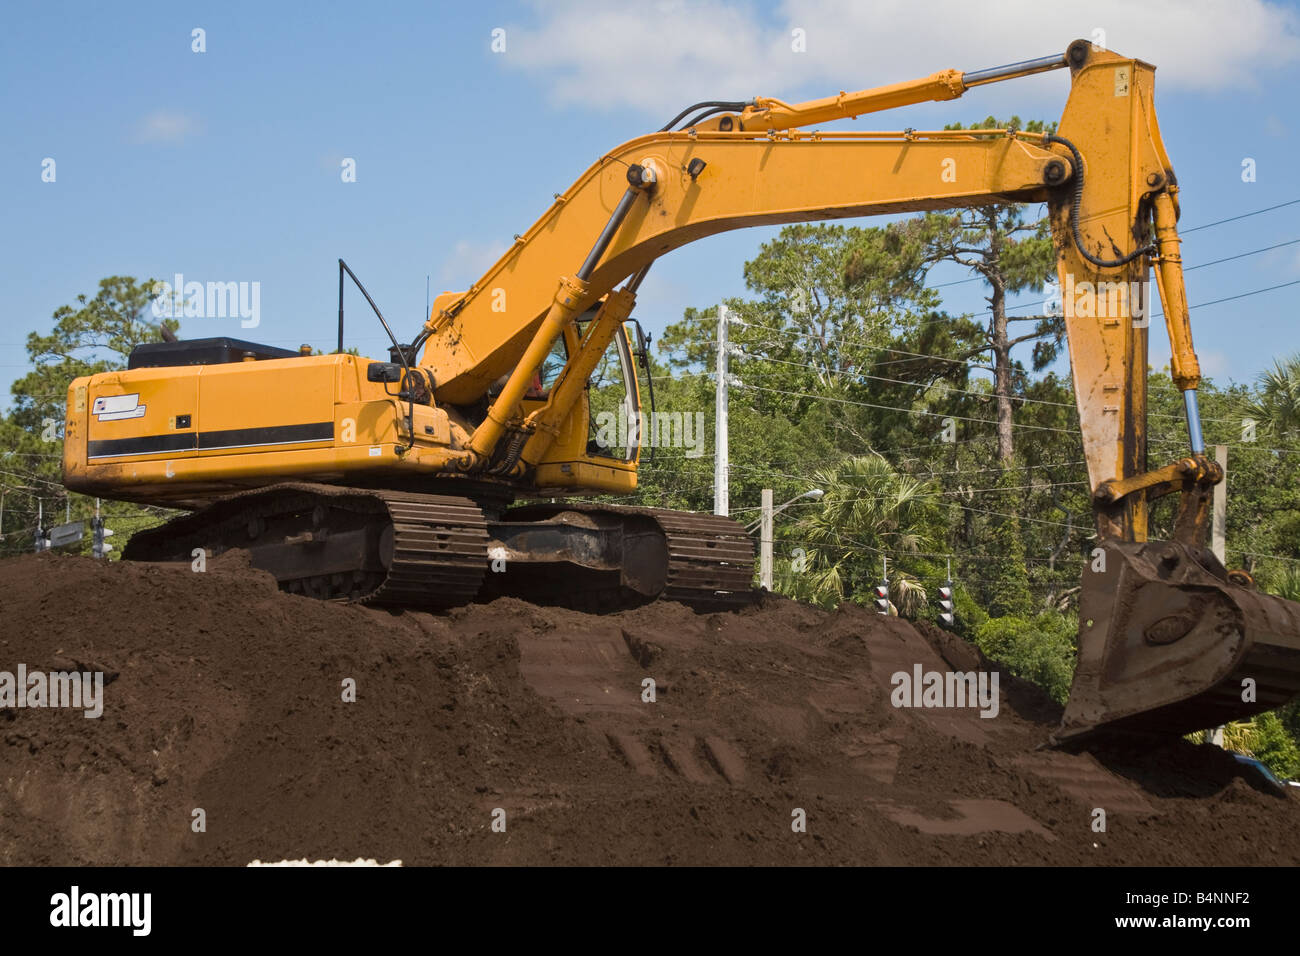 Excavation machinery sitting on a pile of dirt Stock Photo